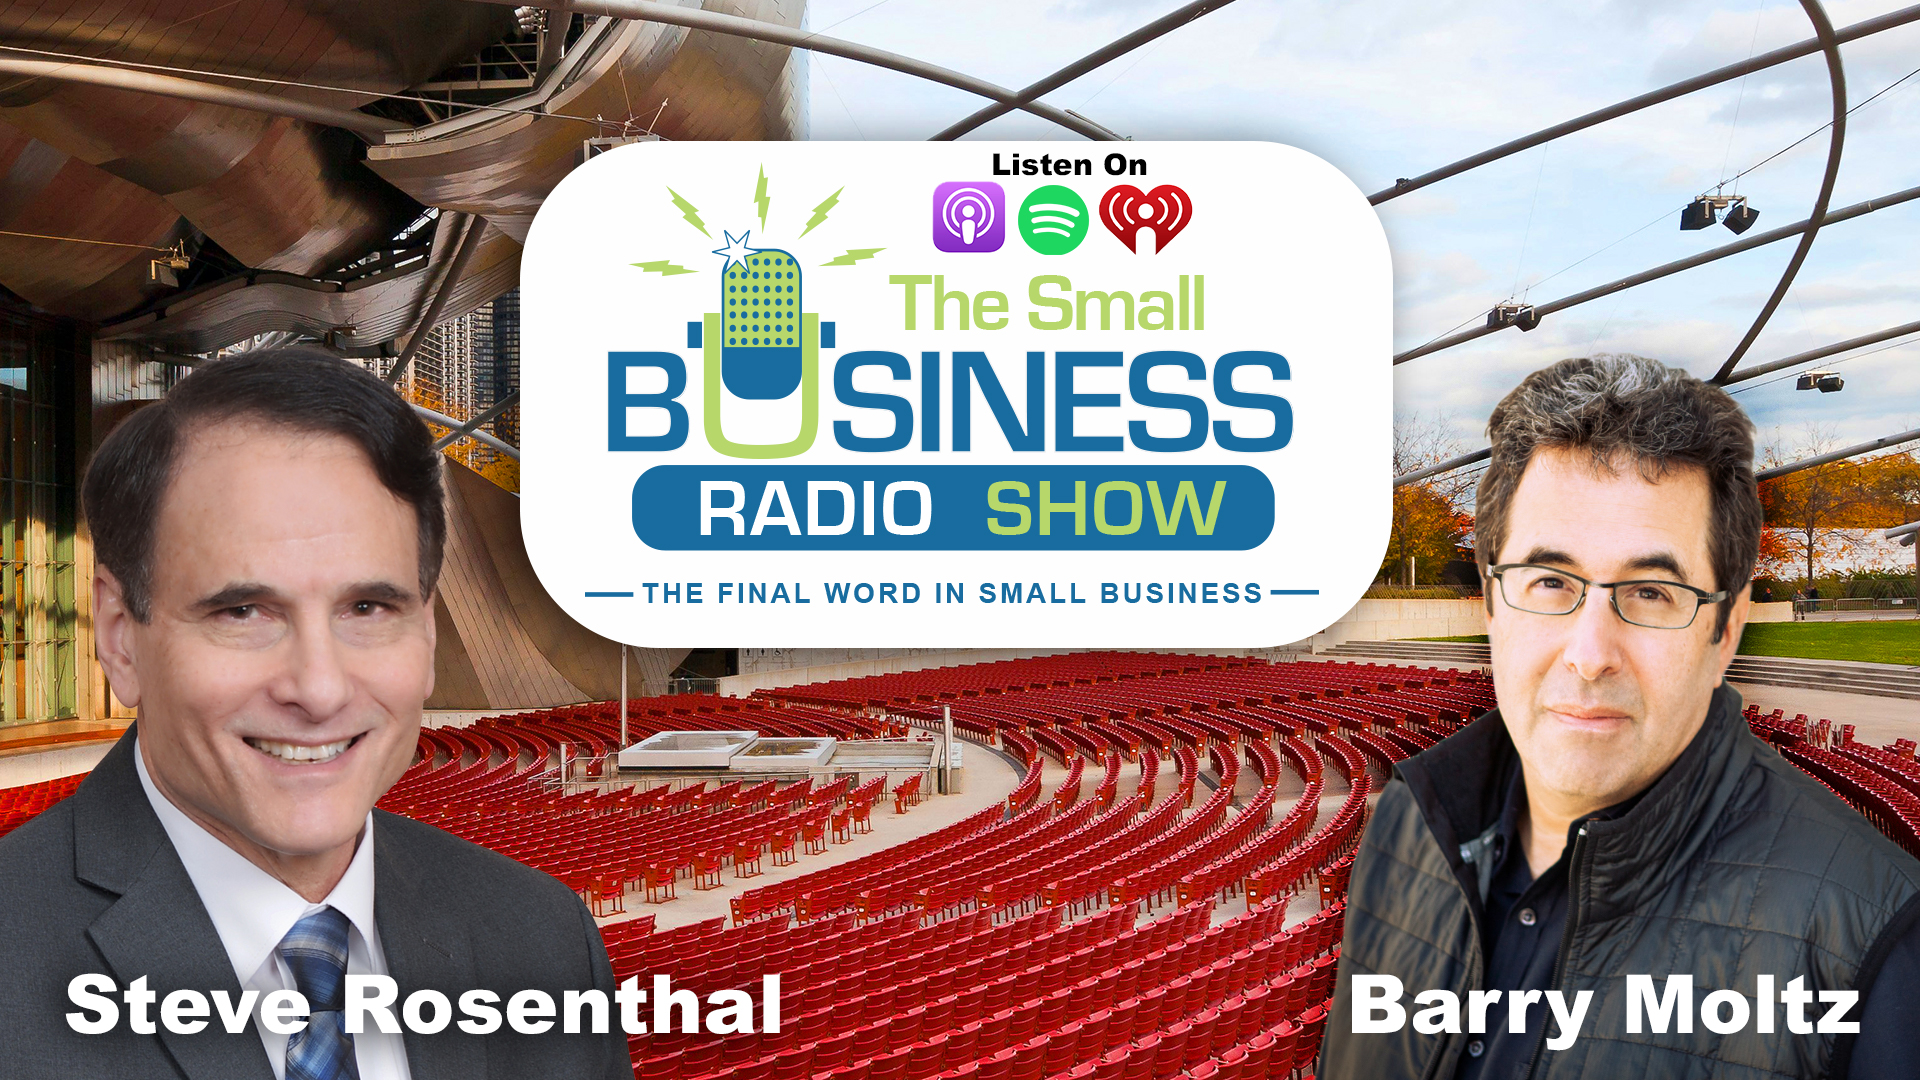 Steve Rosenthal on The Small Business Radio Show